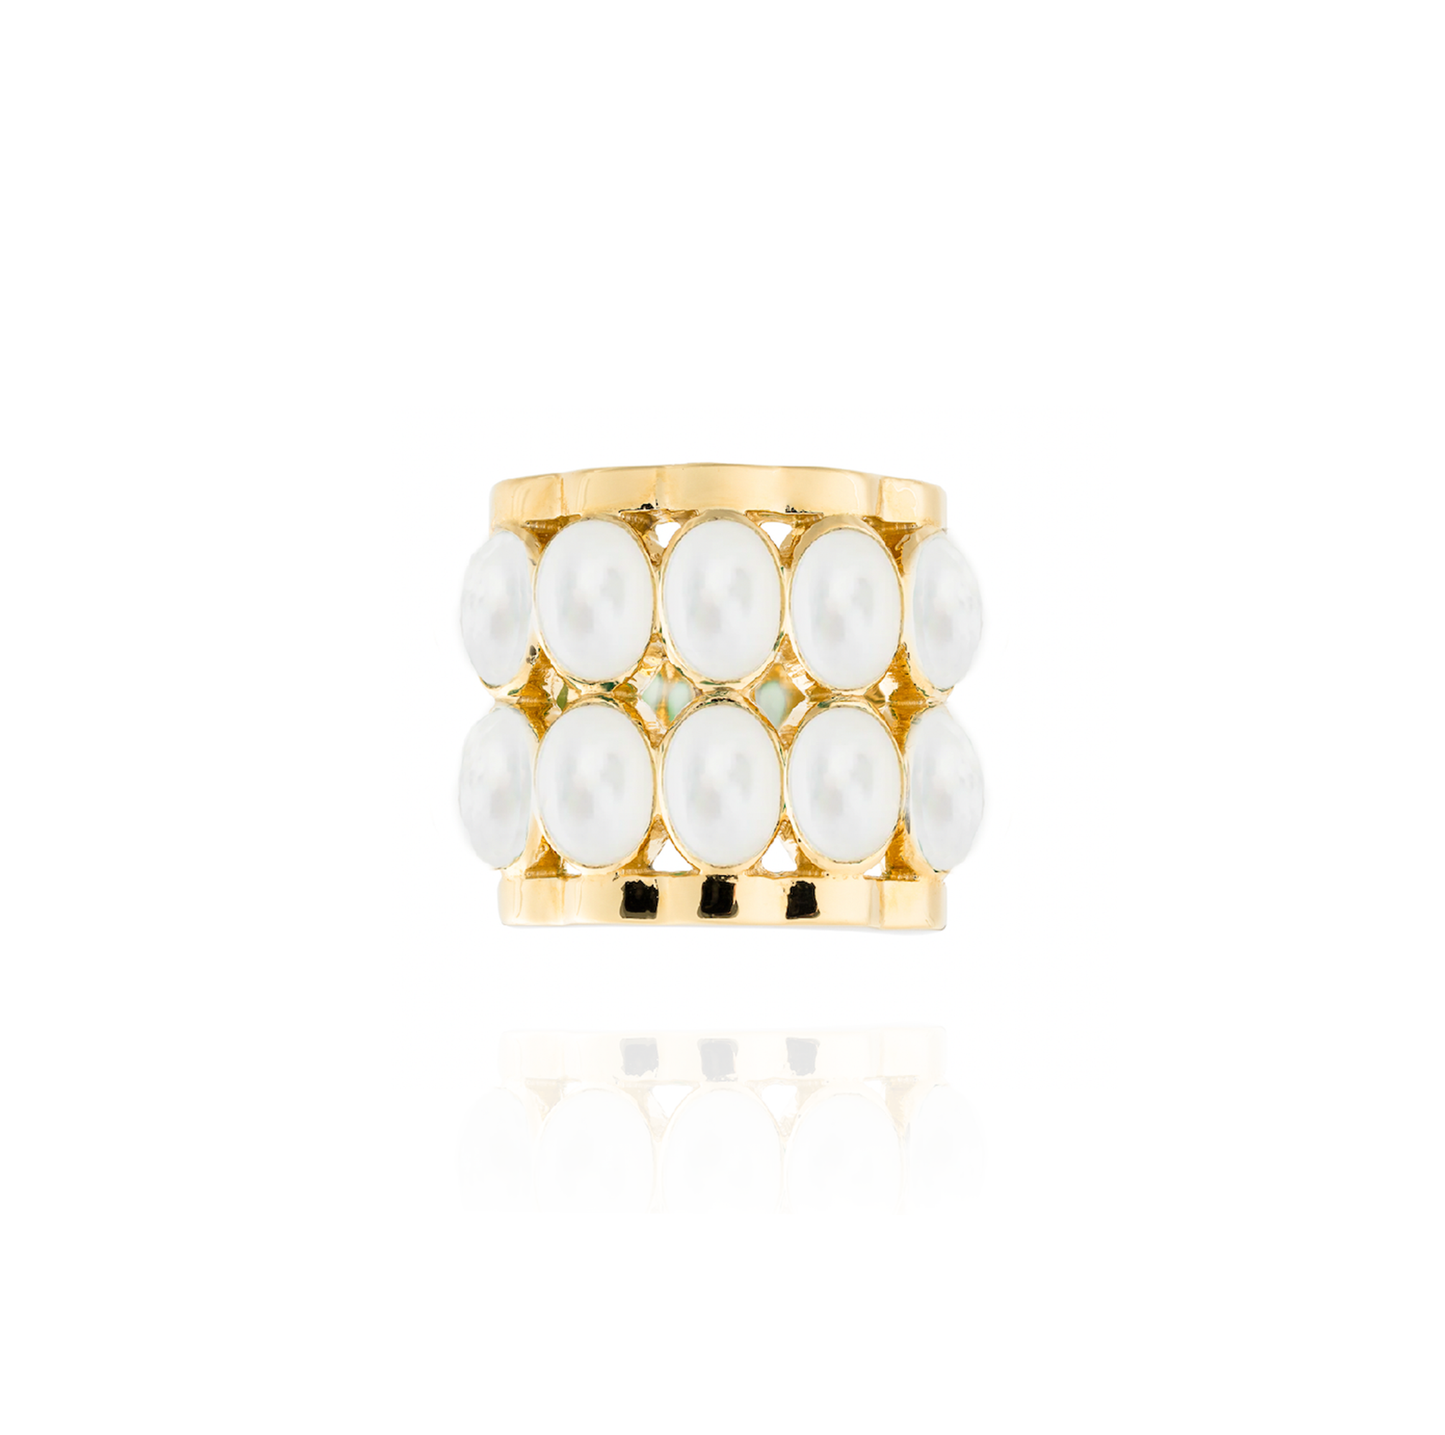 Caramelo 925 Silver O Ring Plated in 18K Yellow Gold with Mother of Pearl Cabouchons